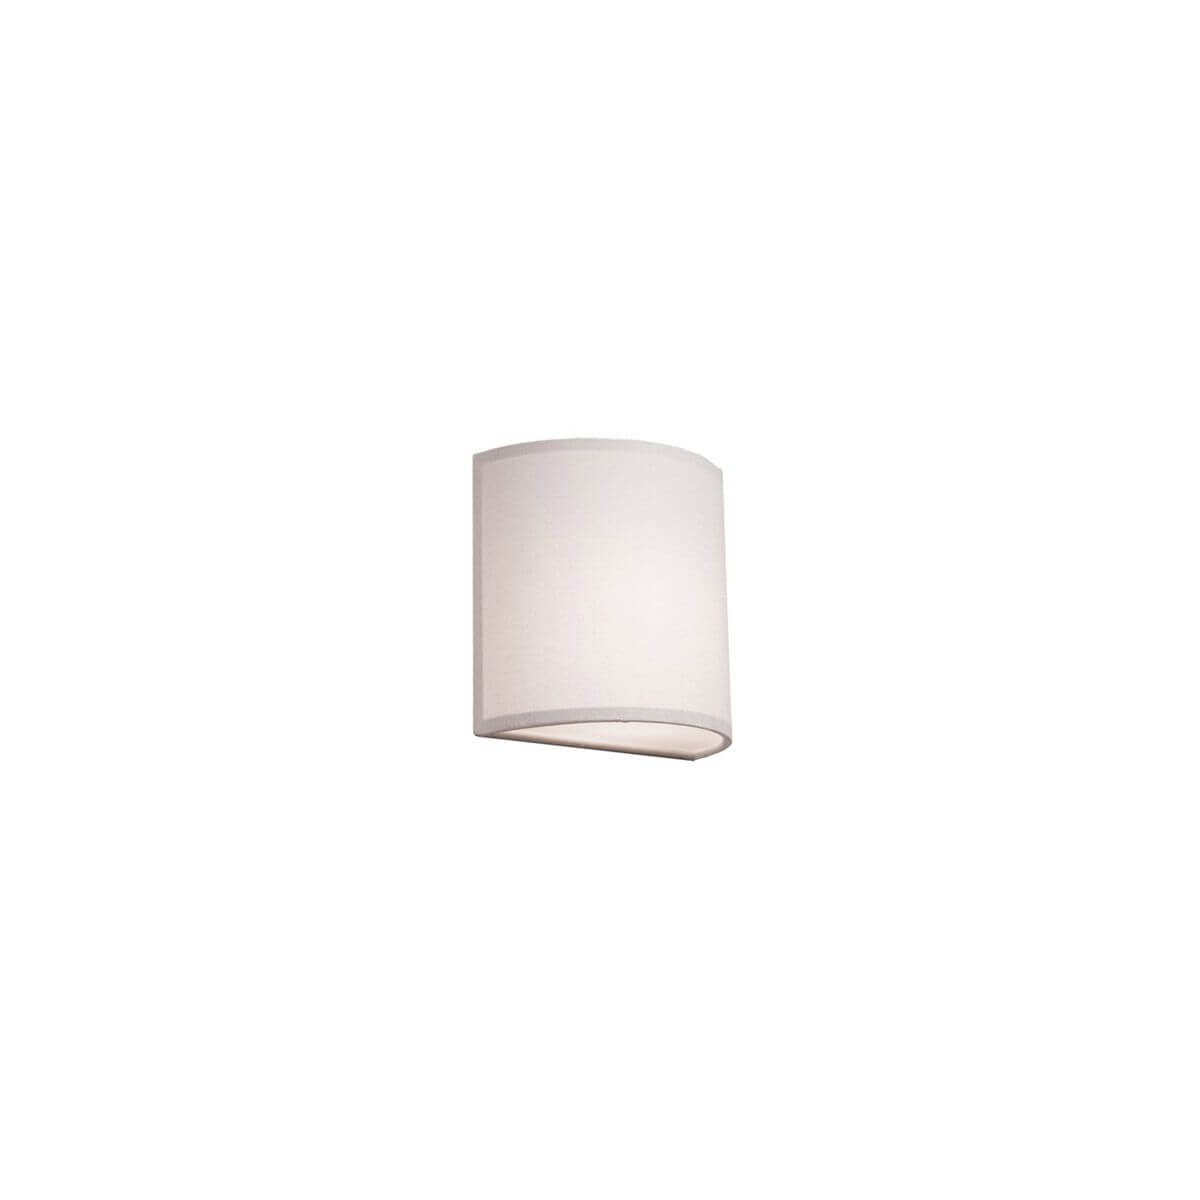 Artcraft Mercer Street 1 Light 10 inch Tall Wall Sconce in White SC526WH